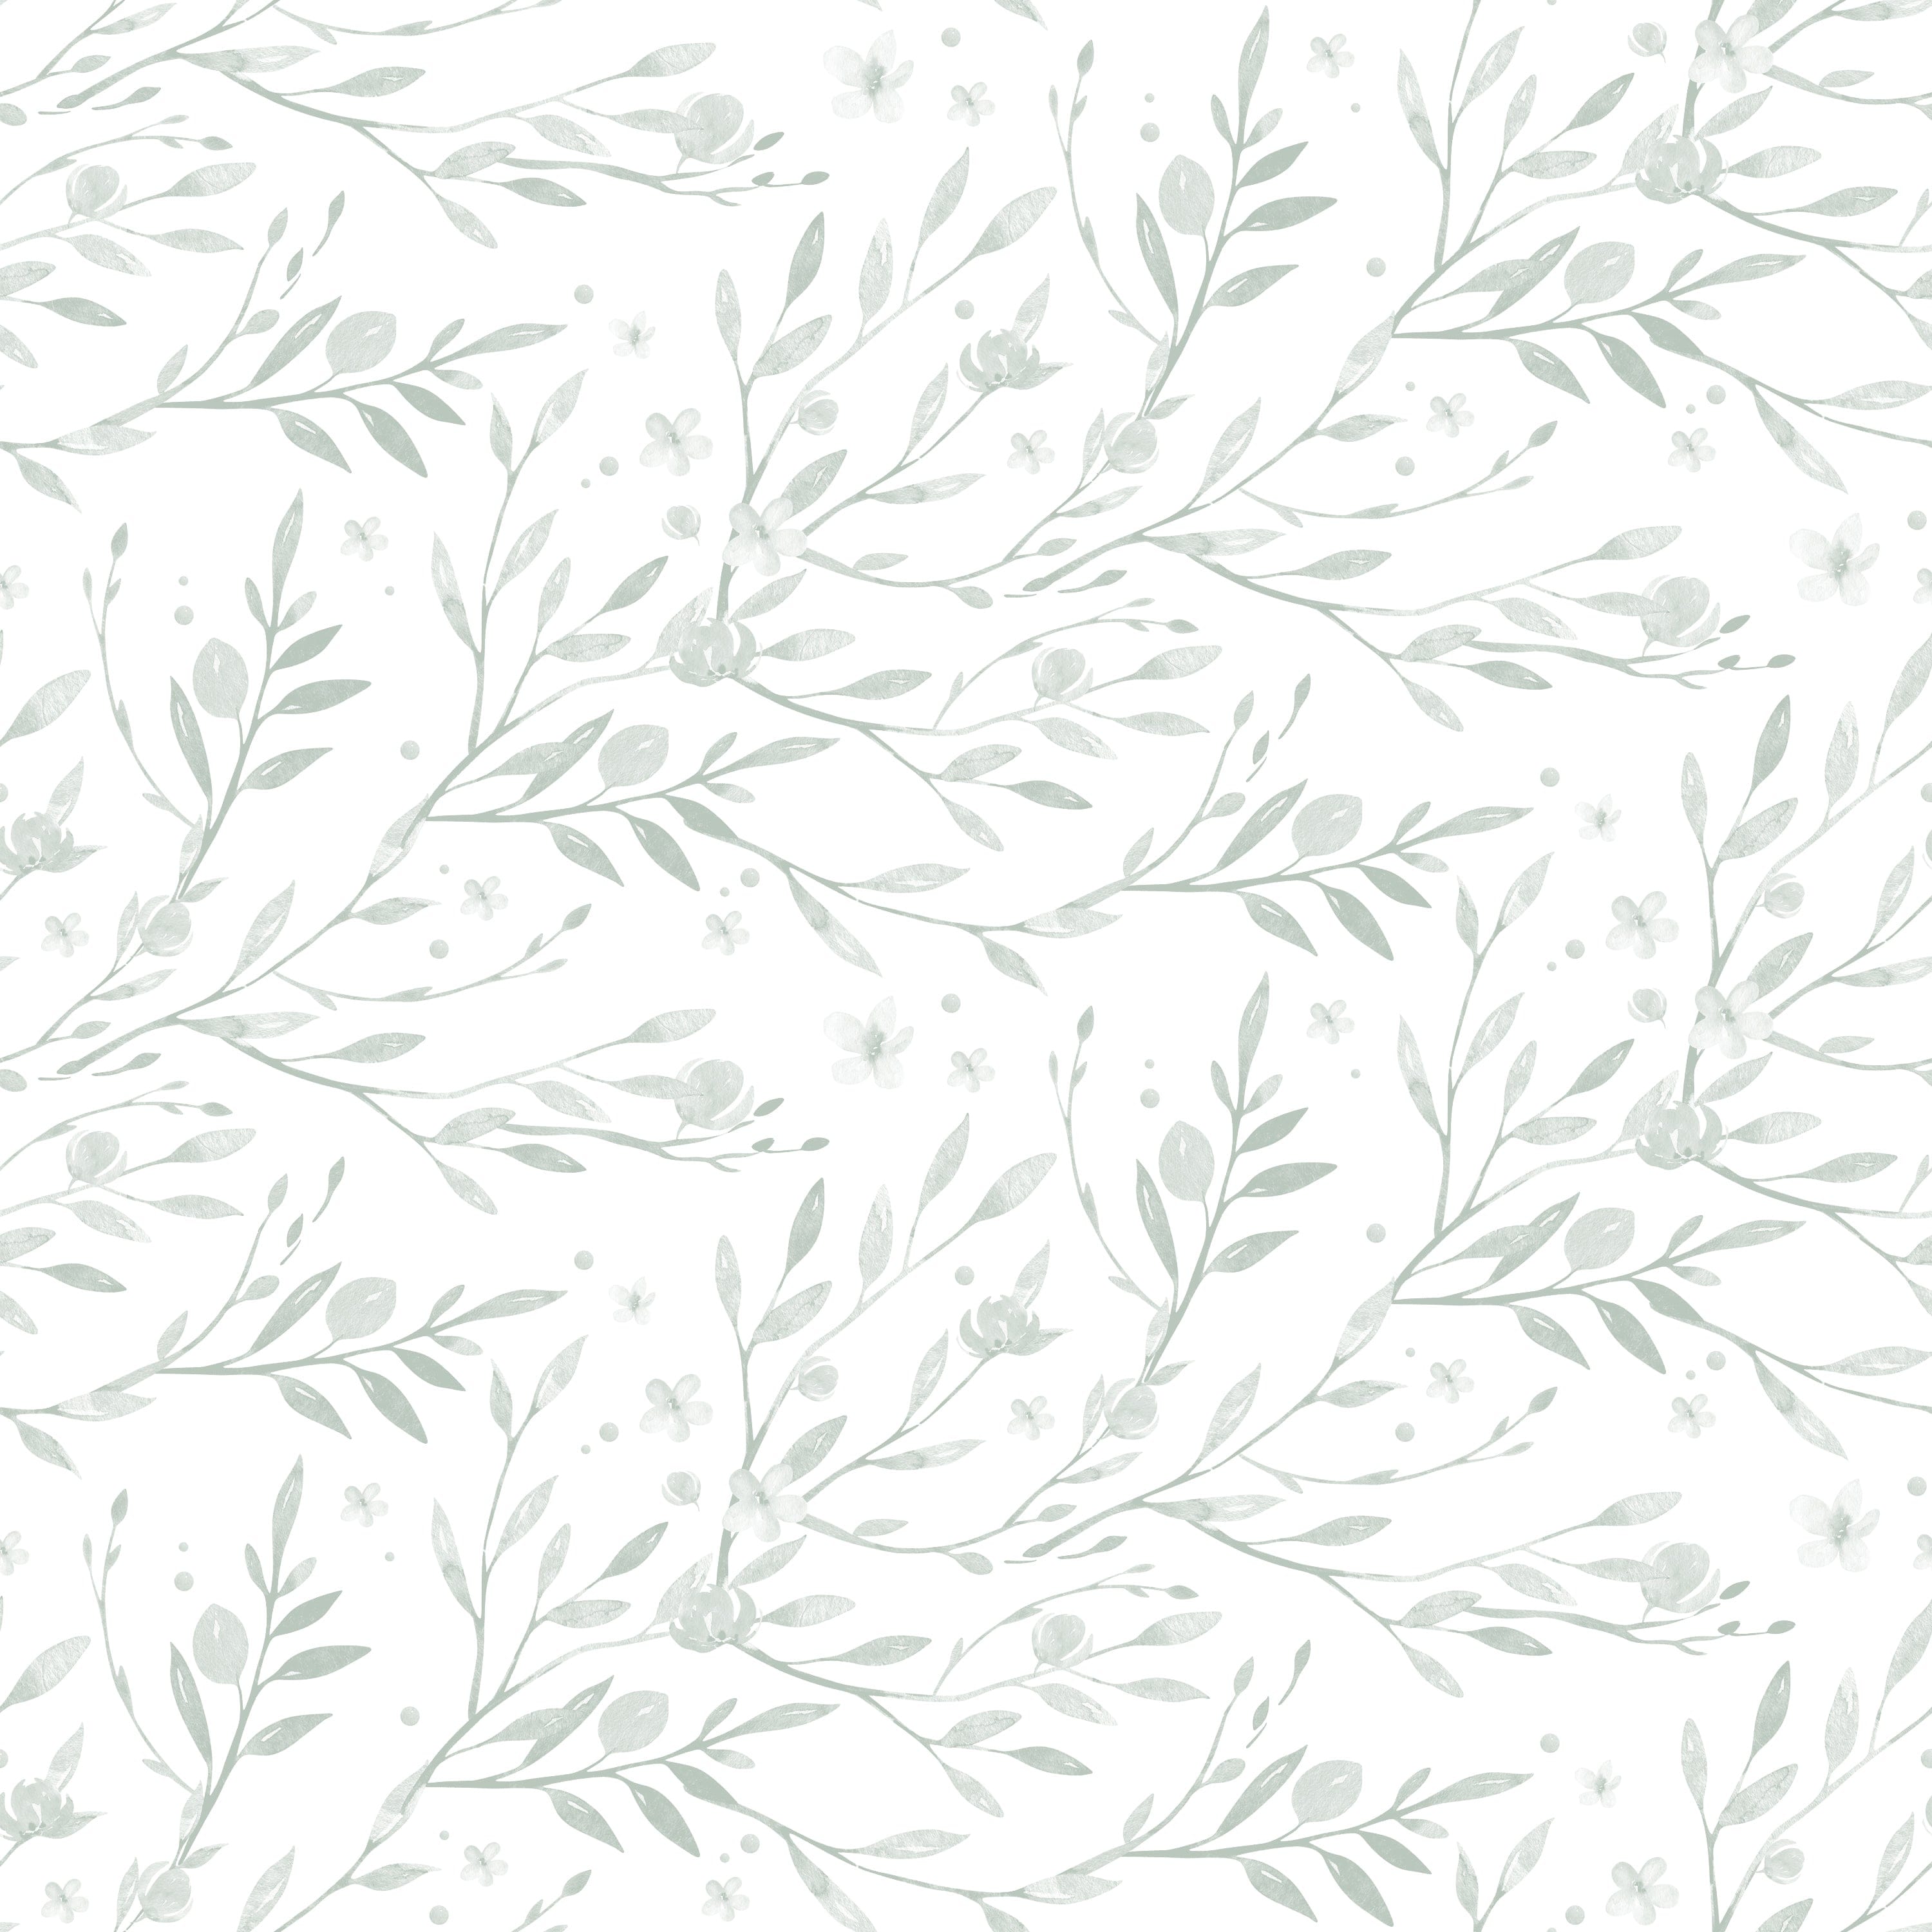 A close-up view of the Watercolor Spring Bird Wallpaper - Seafoam, showcasing the intricate, soft seafoam green foliage and tiny flowers that give a tranquil, springtime ambiance to any space.A close-up view of the Watercolor Spring Bird Wallpaper - Seafoam, showcasing the intricate, soft seafoam green foliage and tiny flowers that give a tranquil, springtime ambiance to any space.